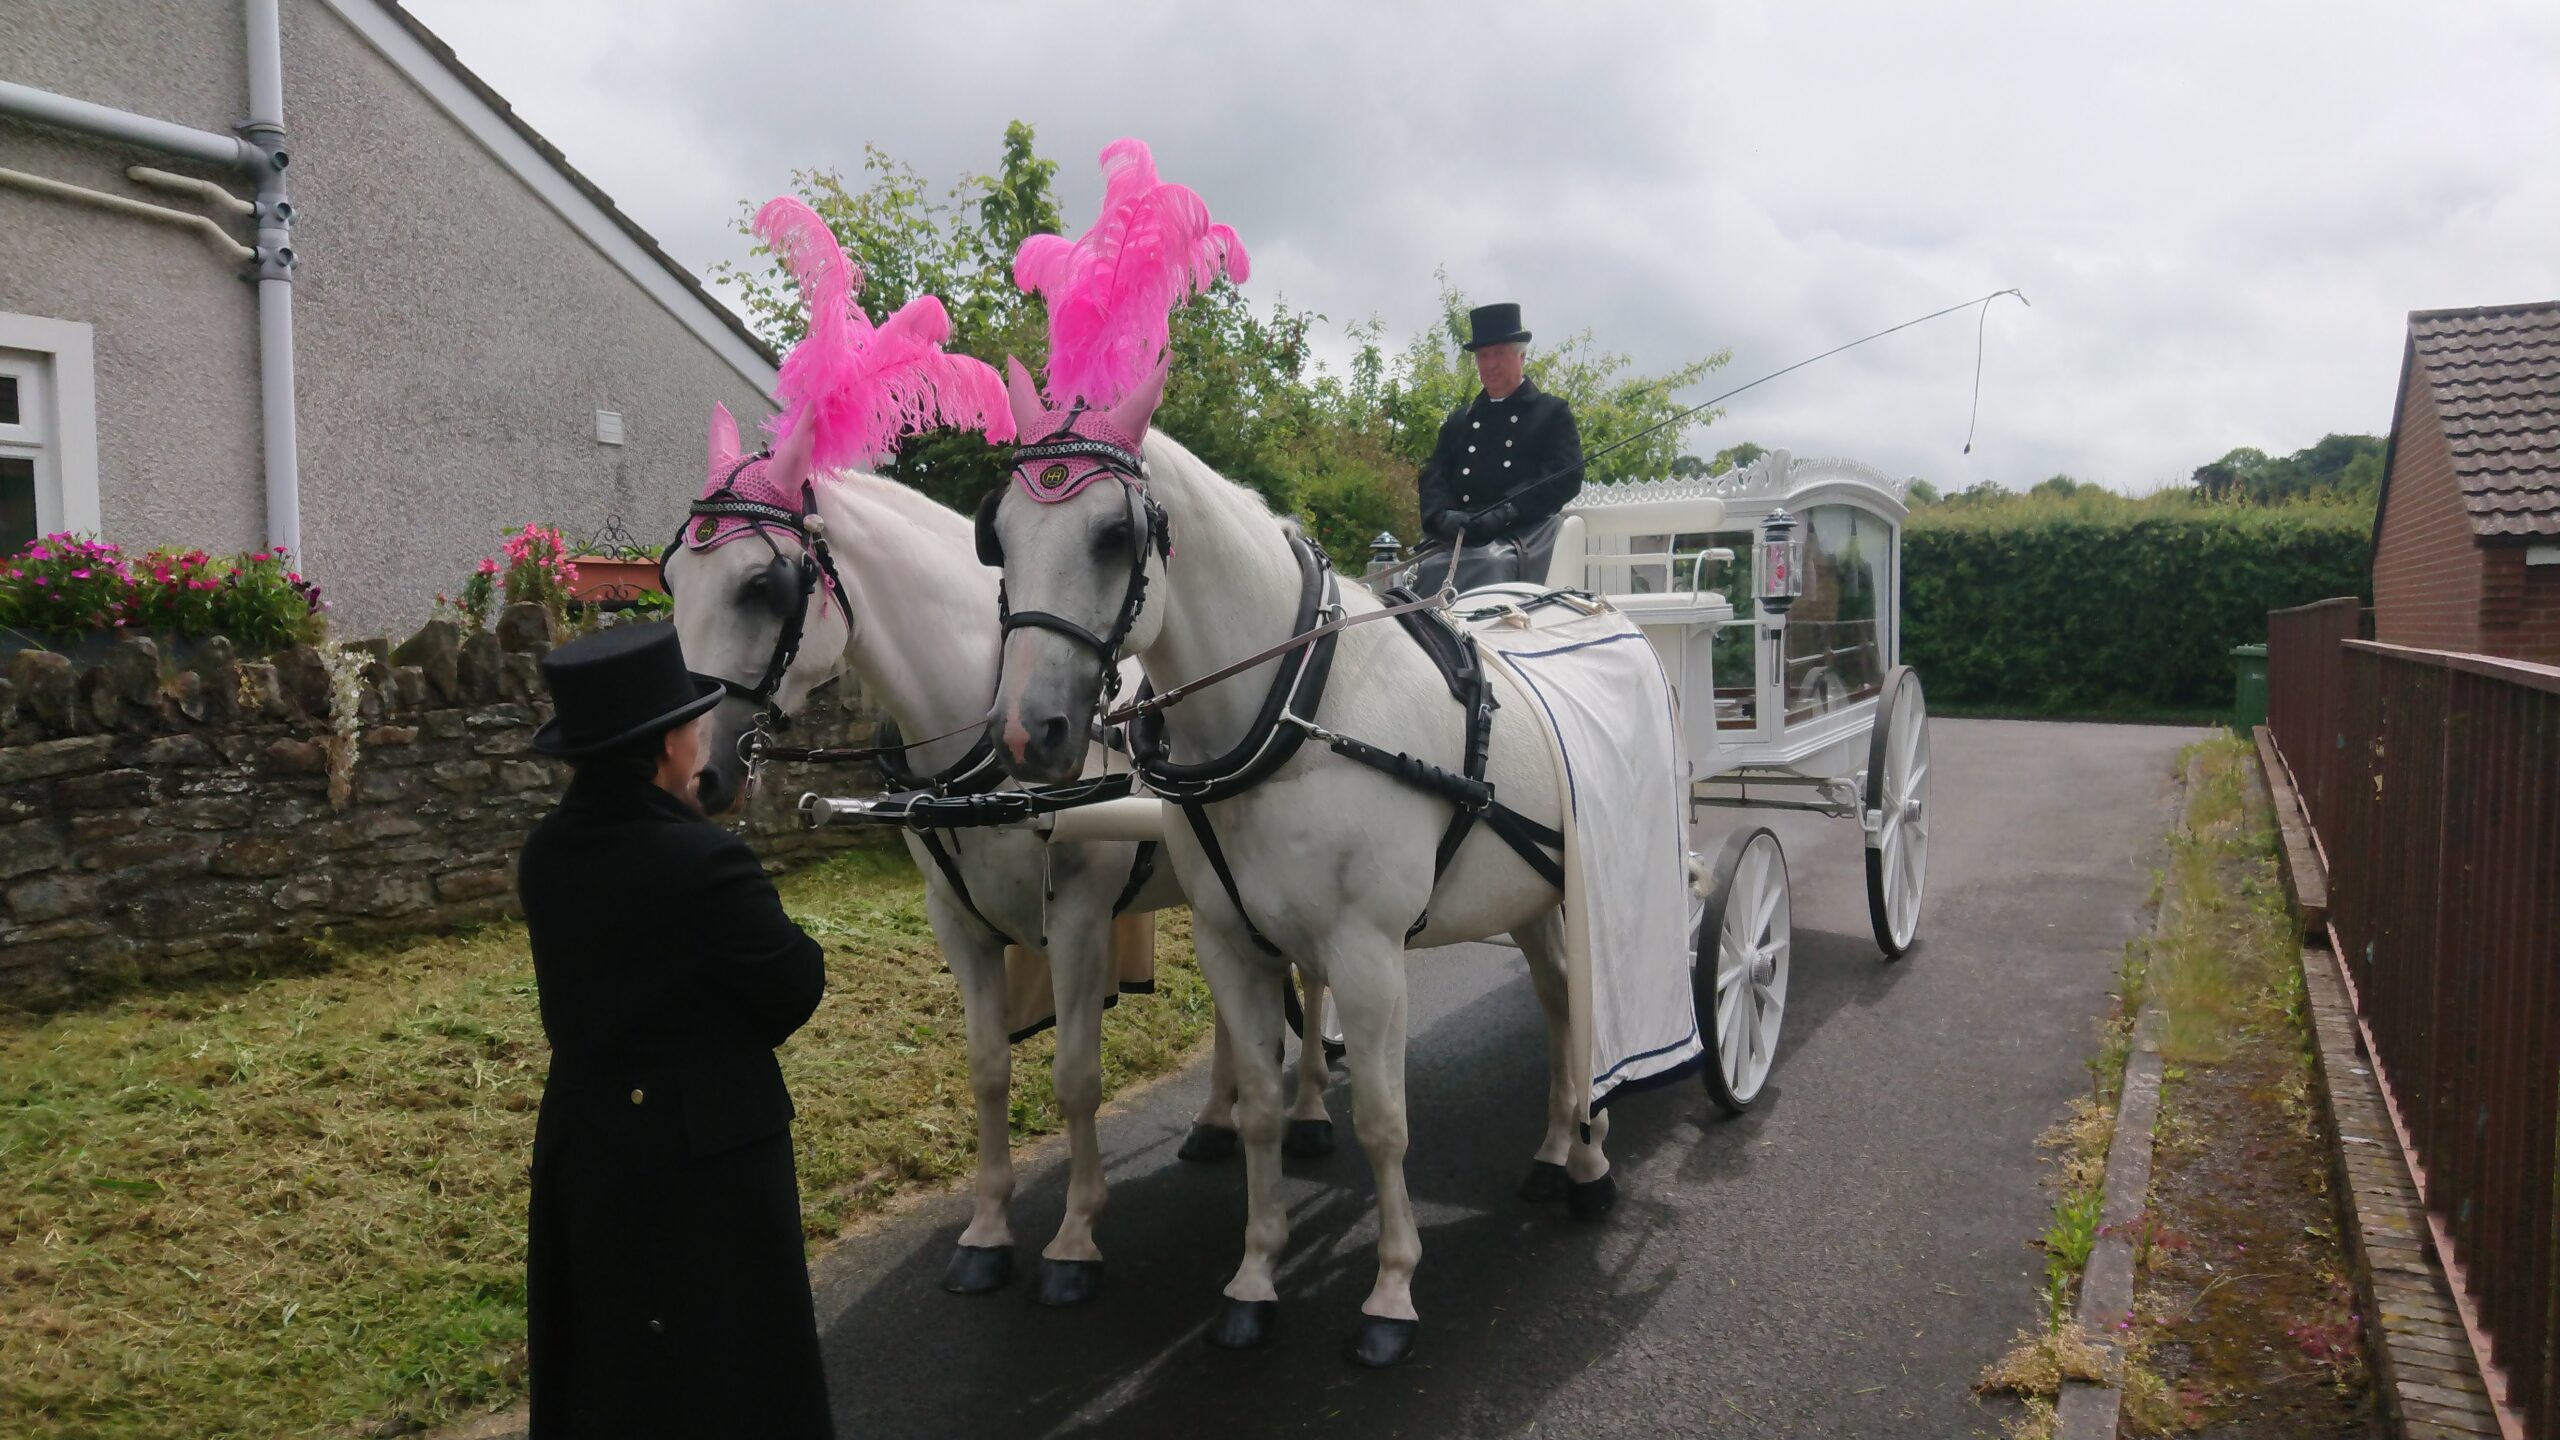 Horse drawn funeral carriage south wales 01